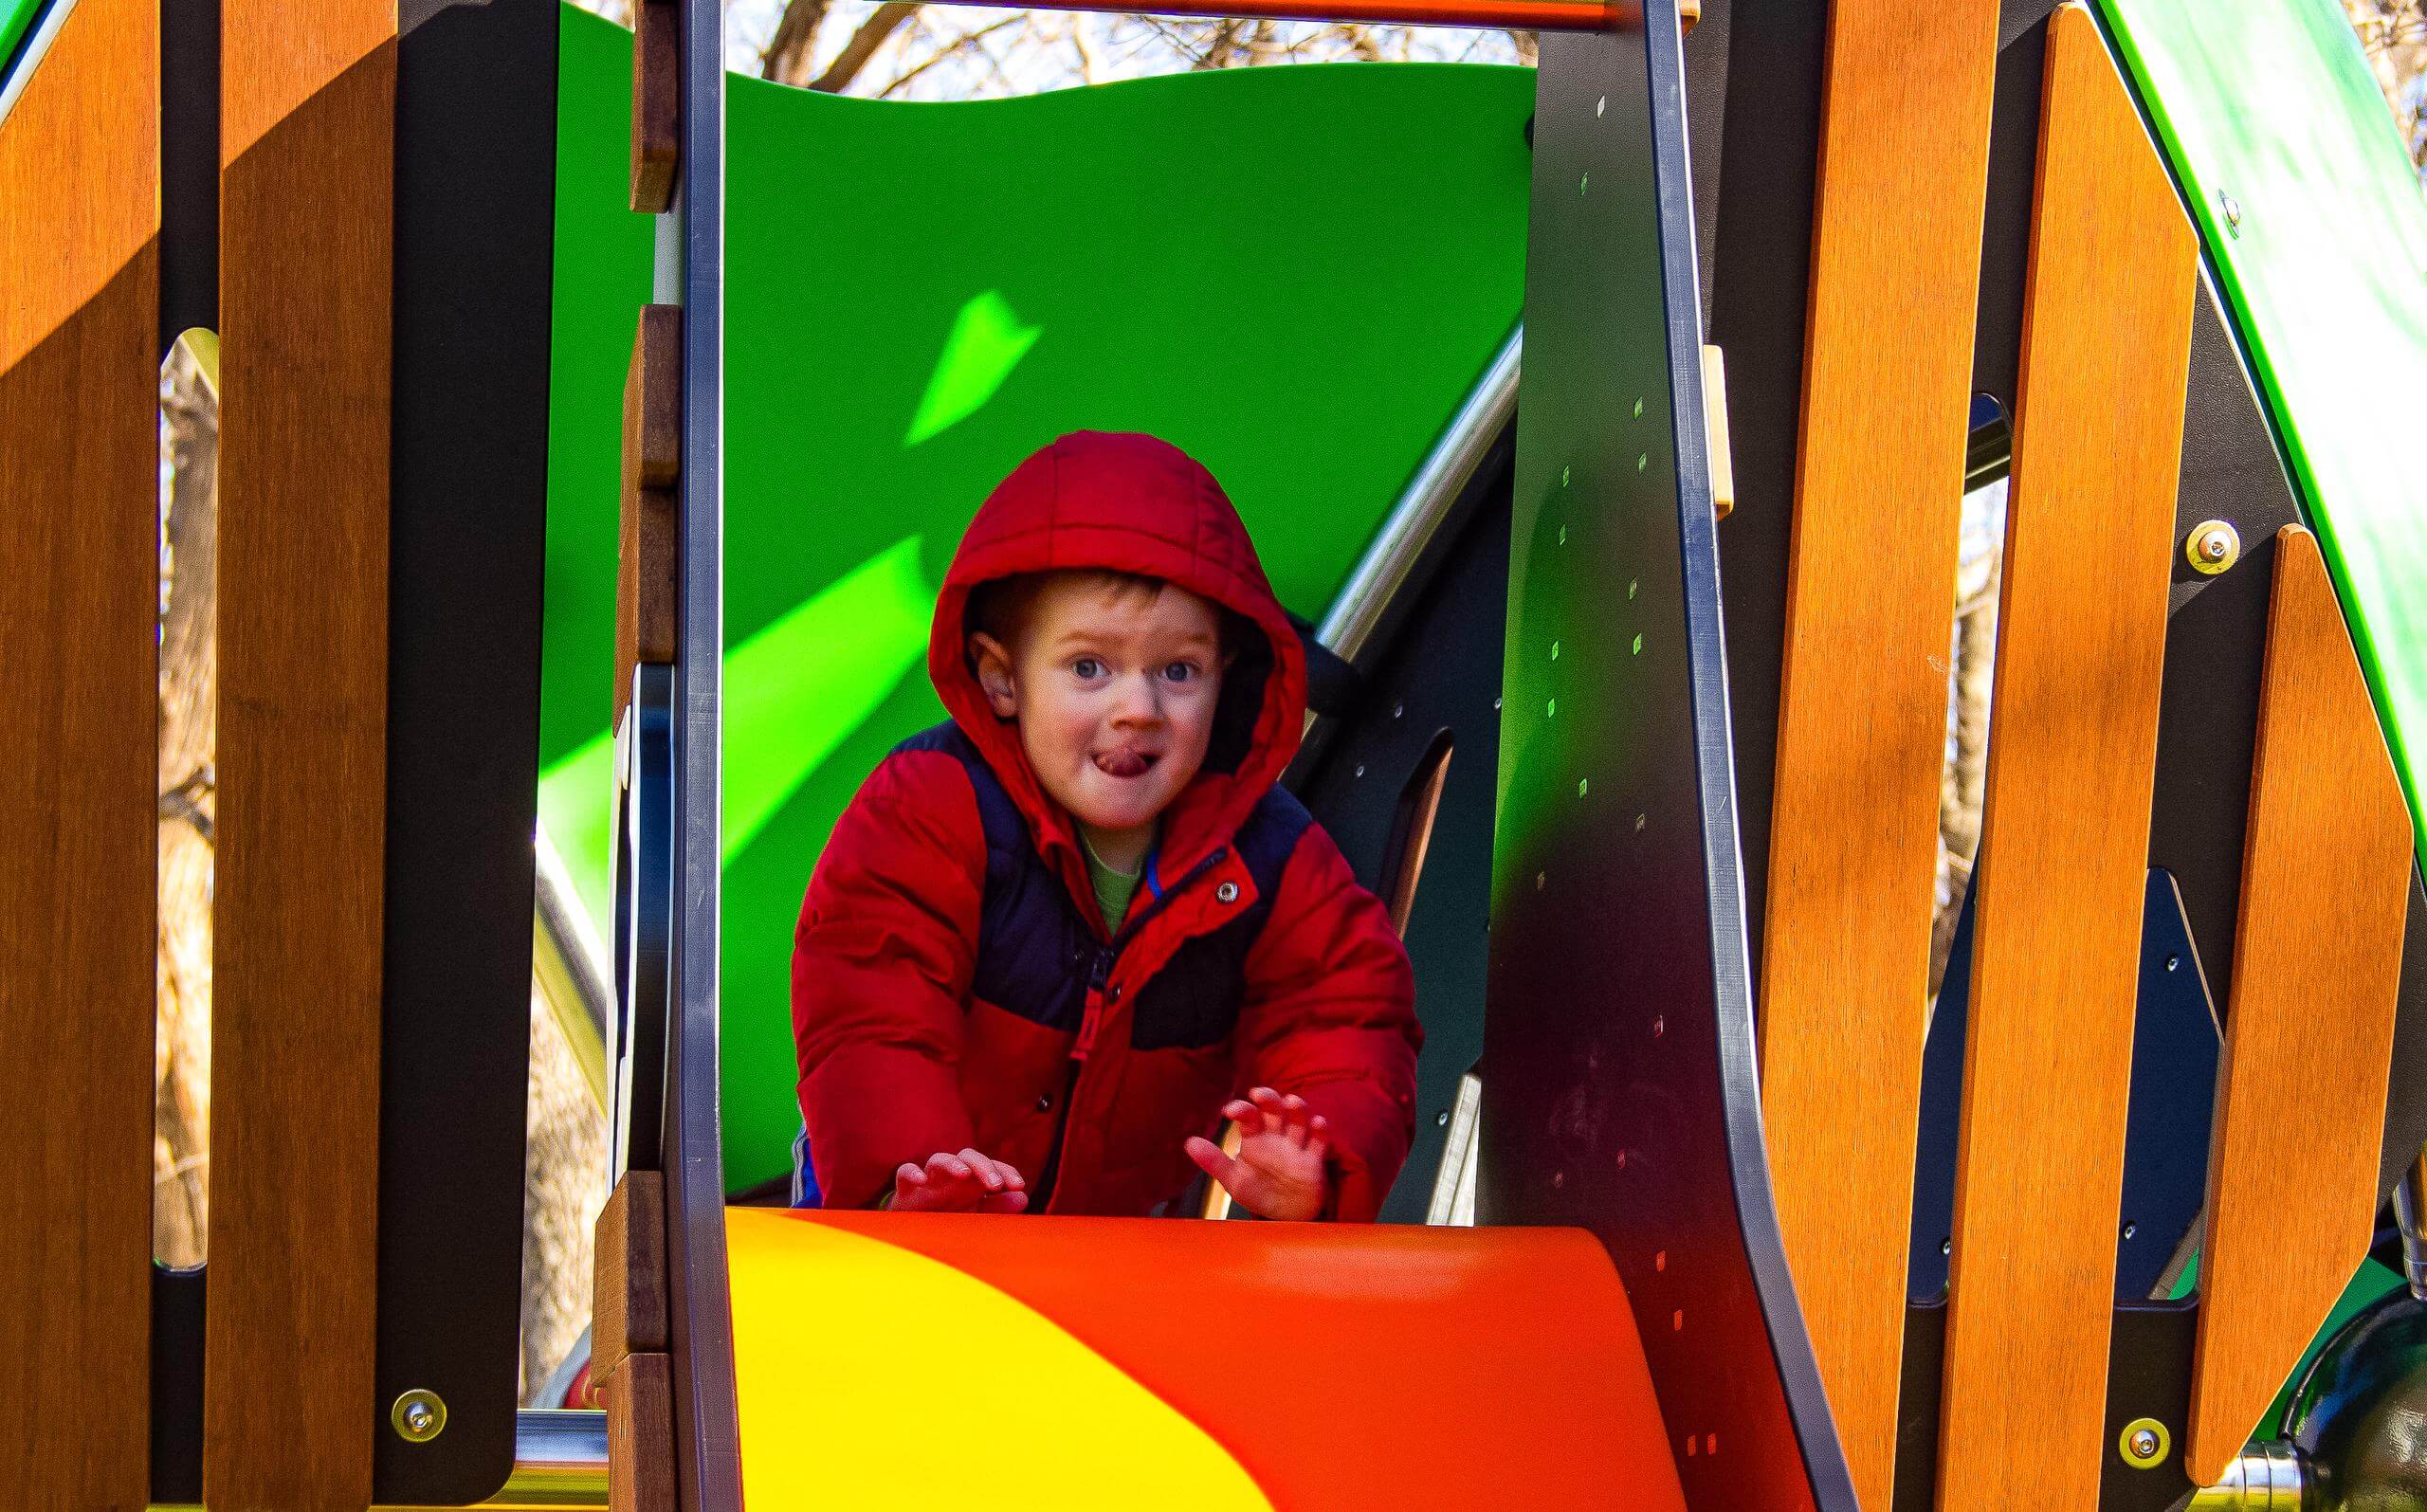 Child at the top of slide with mischievous smile.